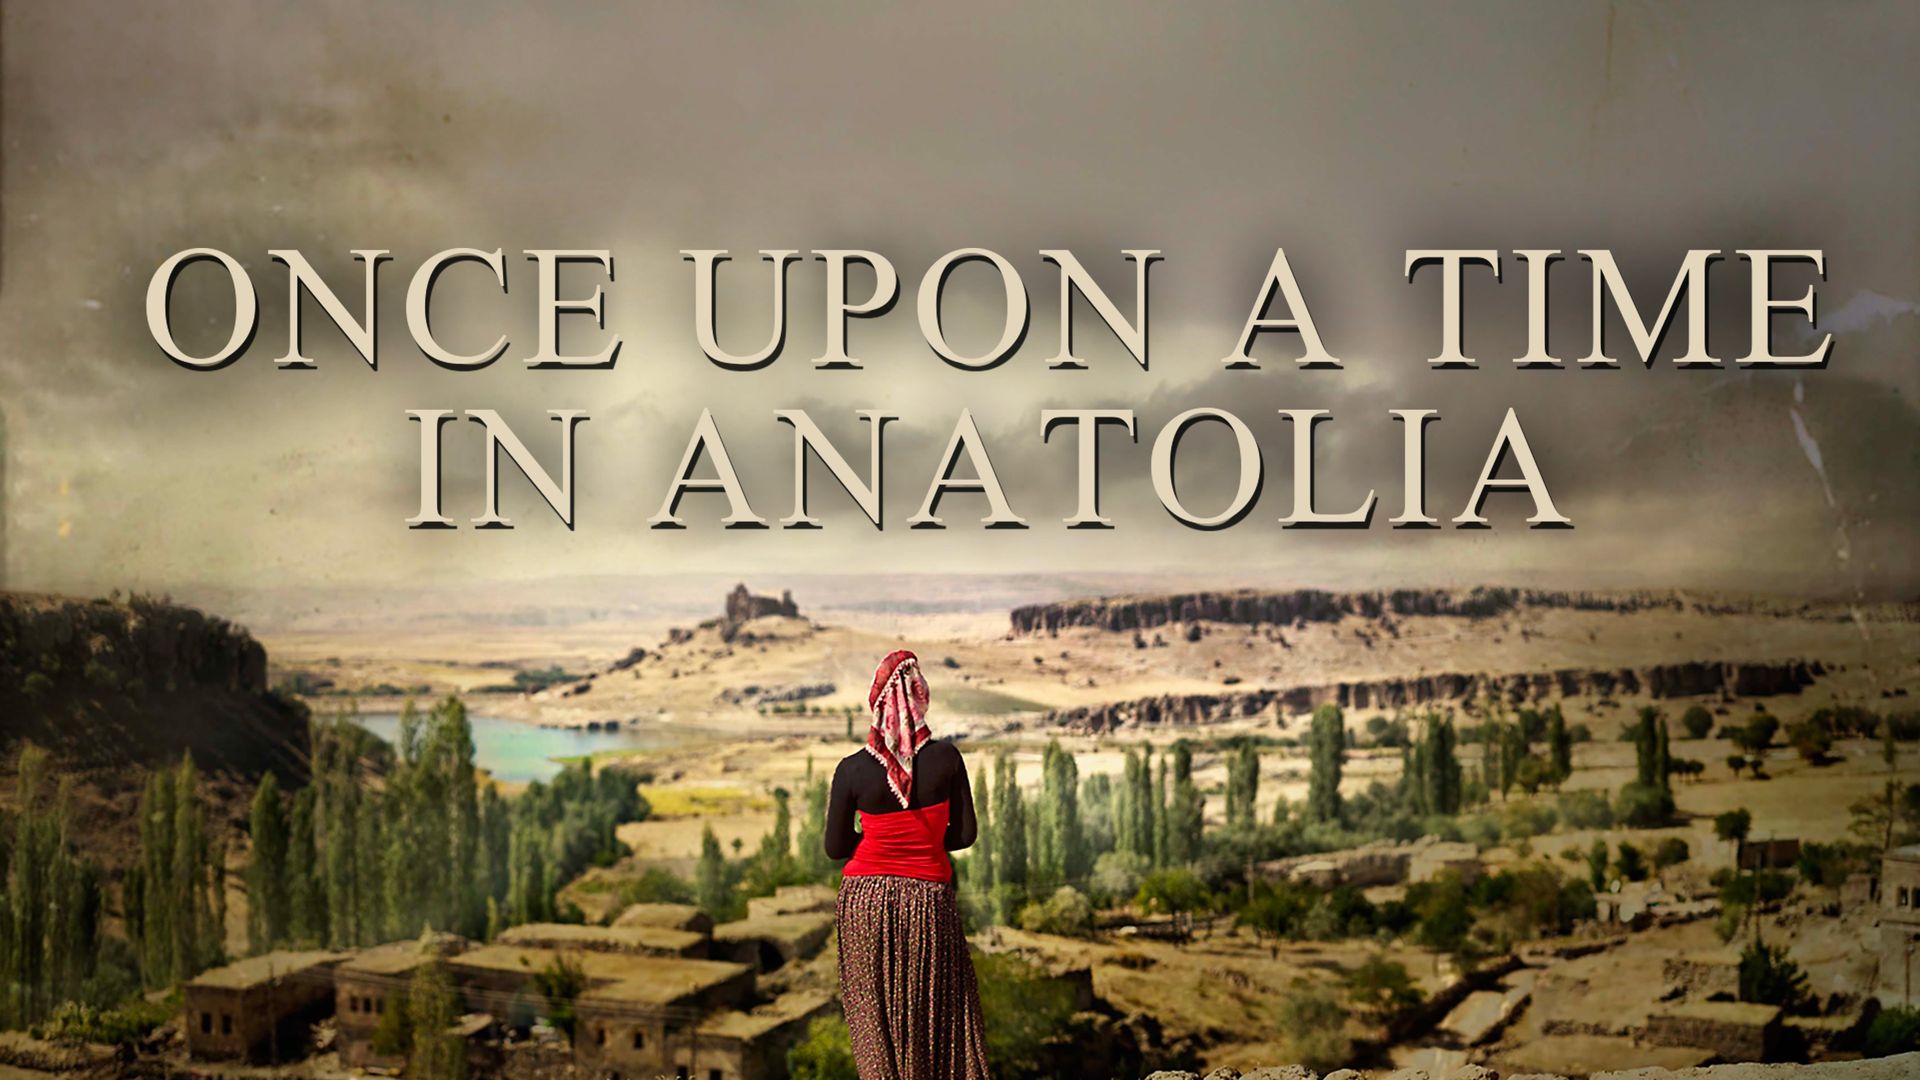 33-facts-about-the-movie-once-upon-a-time-in-anatolia